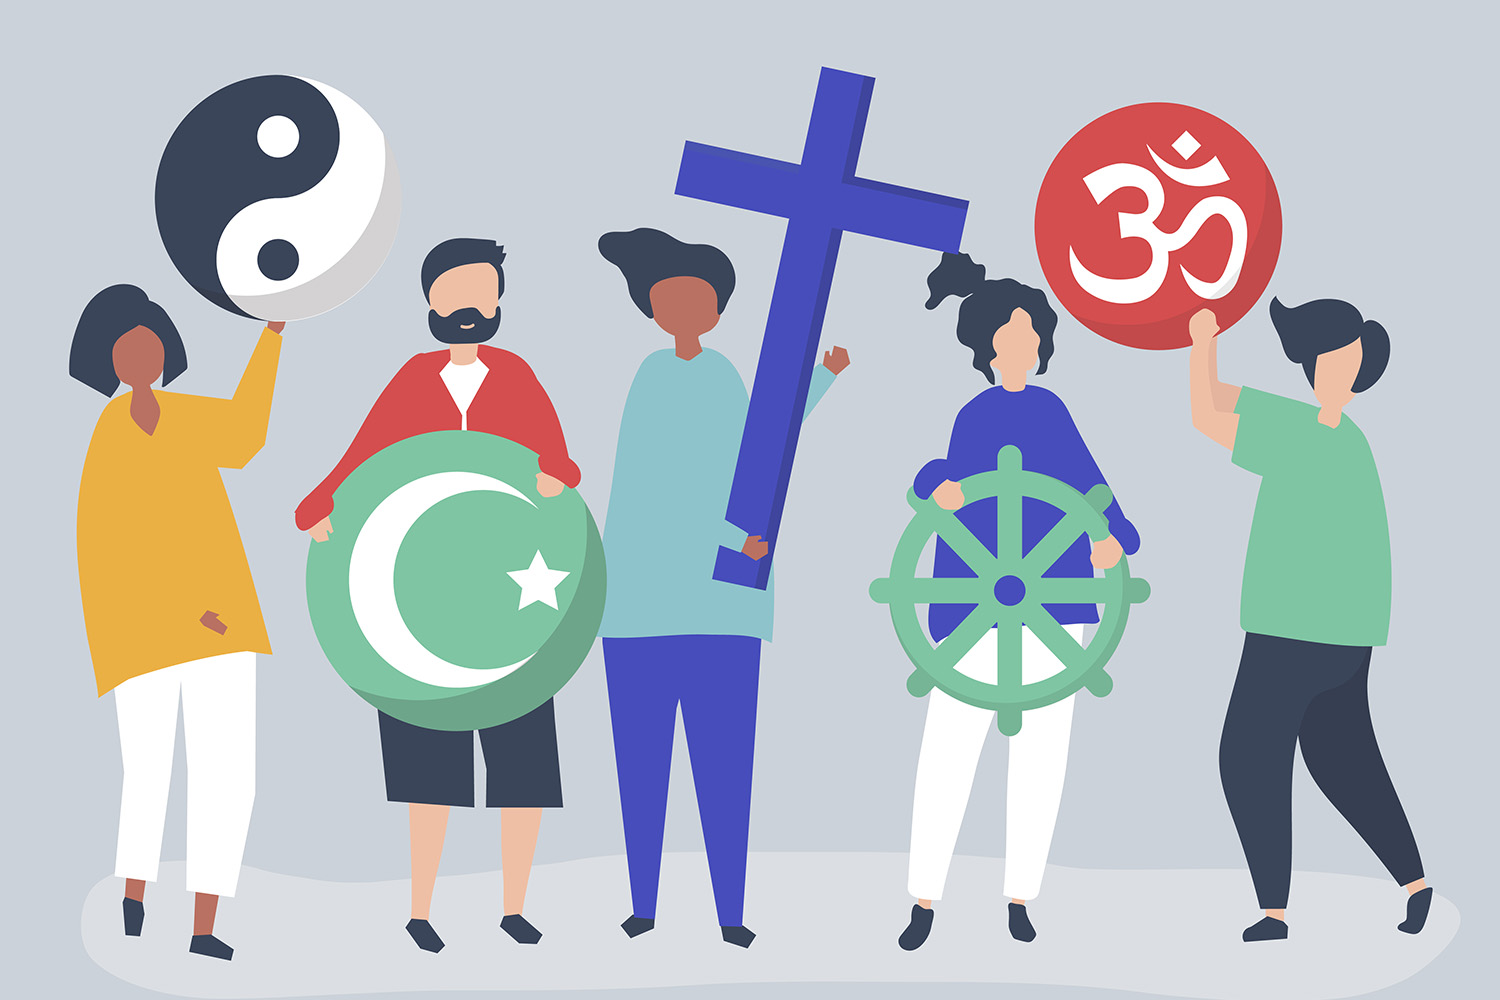 Christianity versus Other Religions